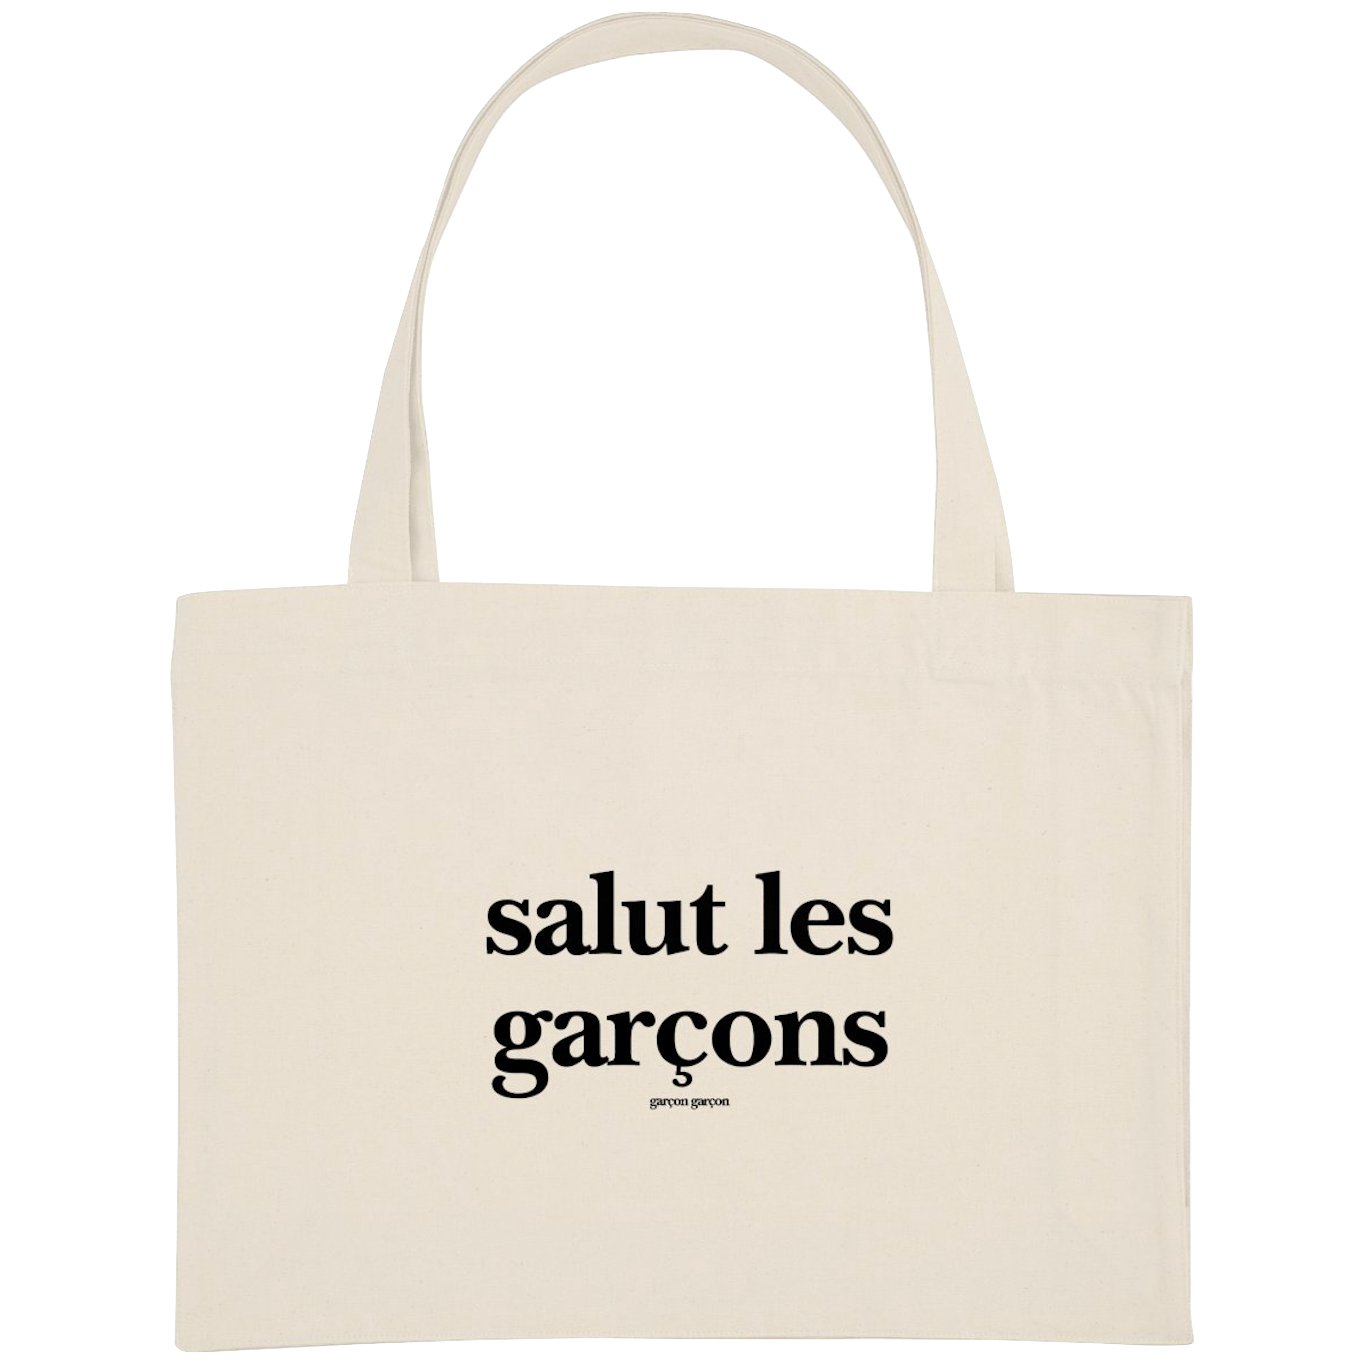 Add the finishing touch to any outfit with Garçon Garçon's range of Parisian-inspired accessories. From chic bags to statement pieces, find your perfect accessory today!